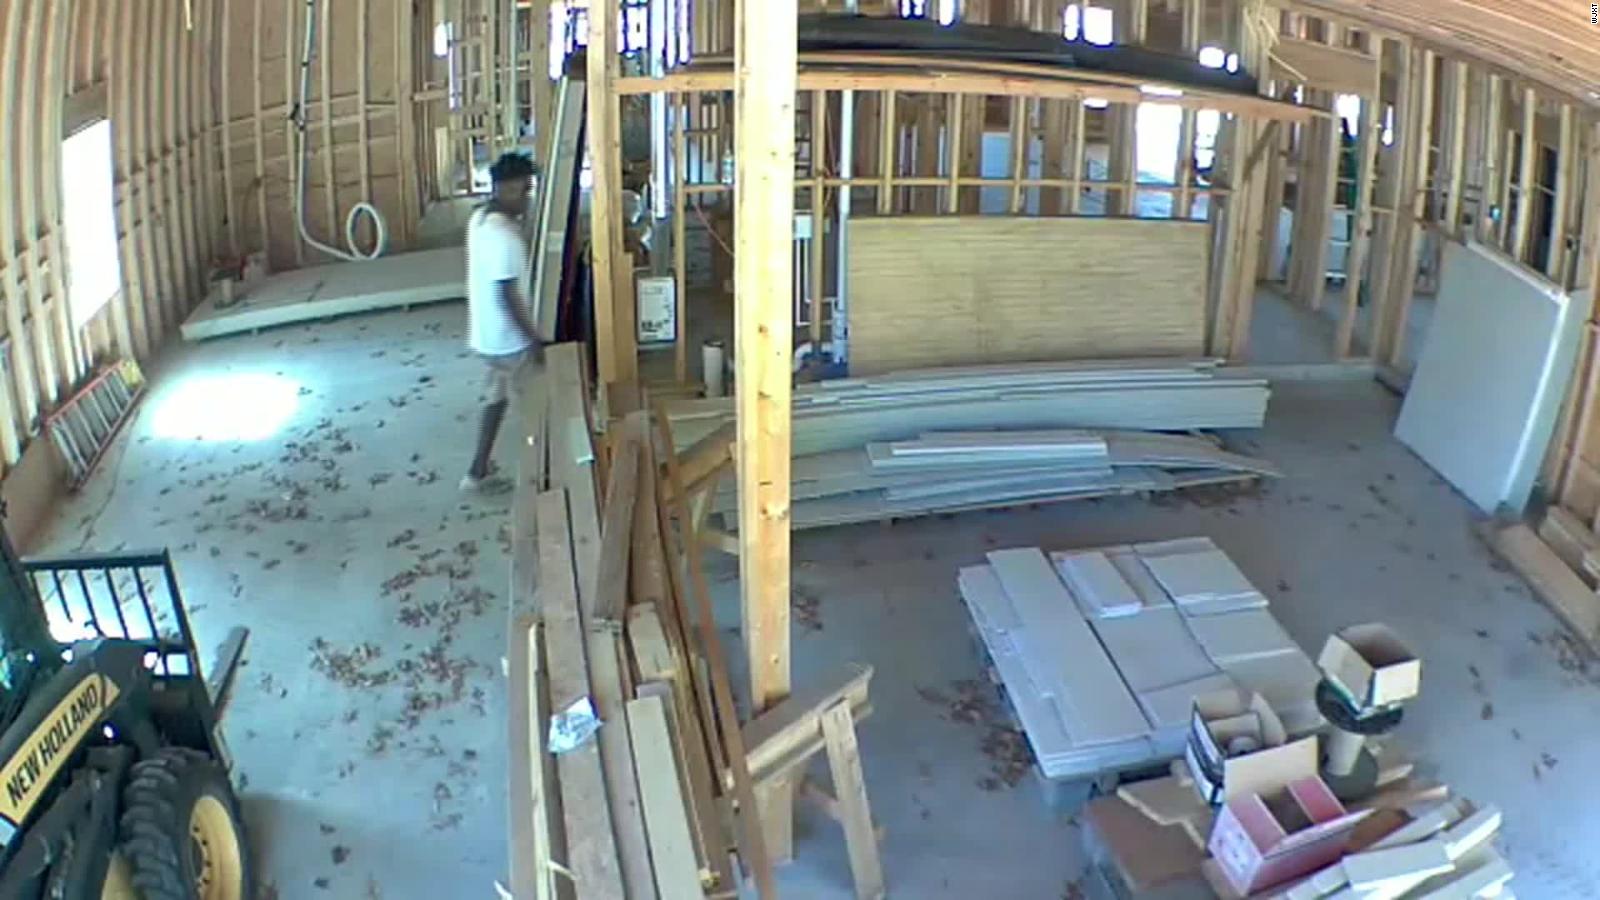 Video shows Ahmaud Arbery at construction site before shooting 